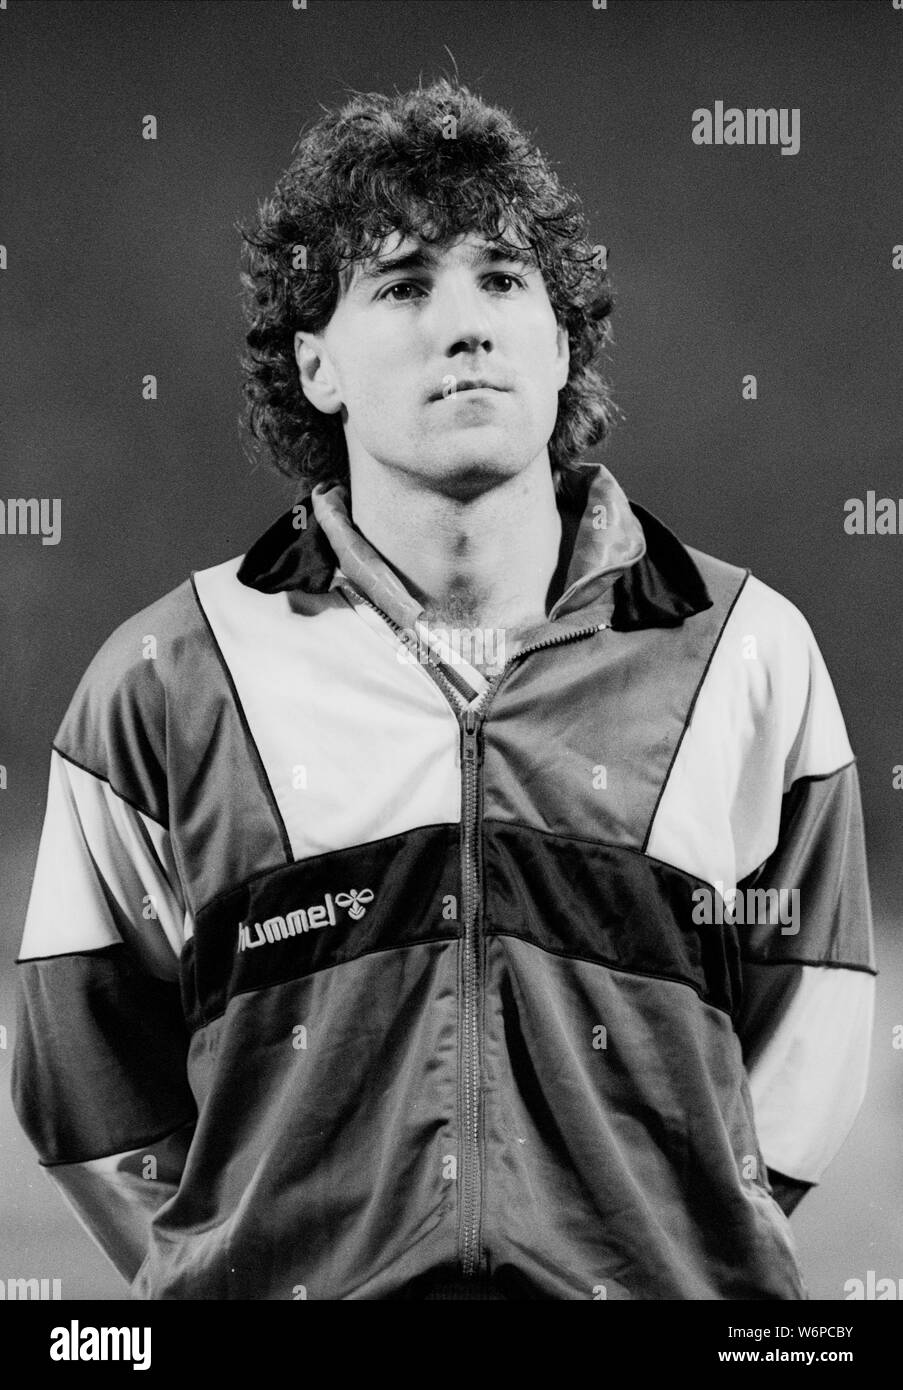 DEAN SAUNDERS, Galles e Derby County FC, 1989 Foto Stock